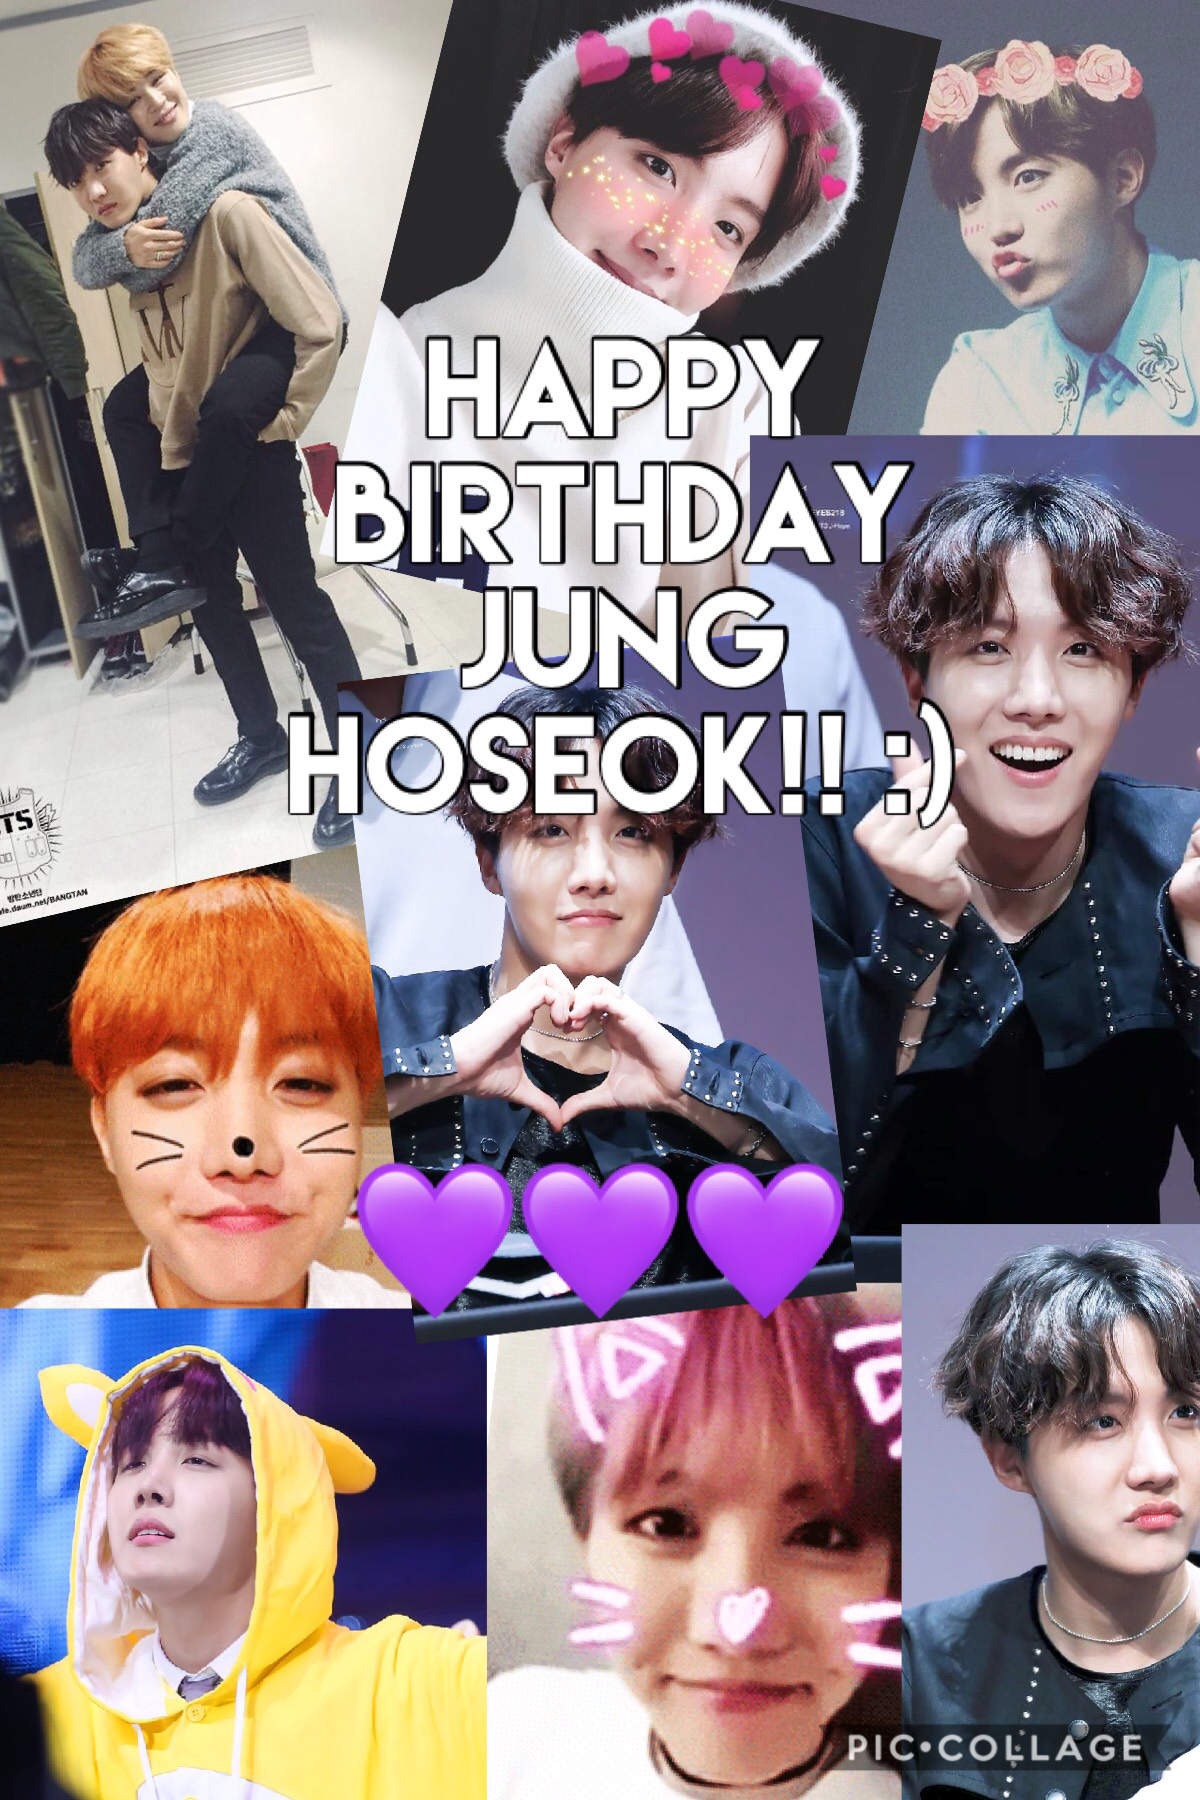 HAPPY BIRTHDAY HOBI!!
You are my sunshine 
My only sunshine 
You make me happy 
When skies are grey
You'll never know dear
How much I love you 
Please don't take my sunshine away --->
I 💜U forever jhope. You have a great year ahead of you. My hope-jhope😘💜